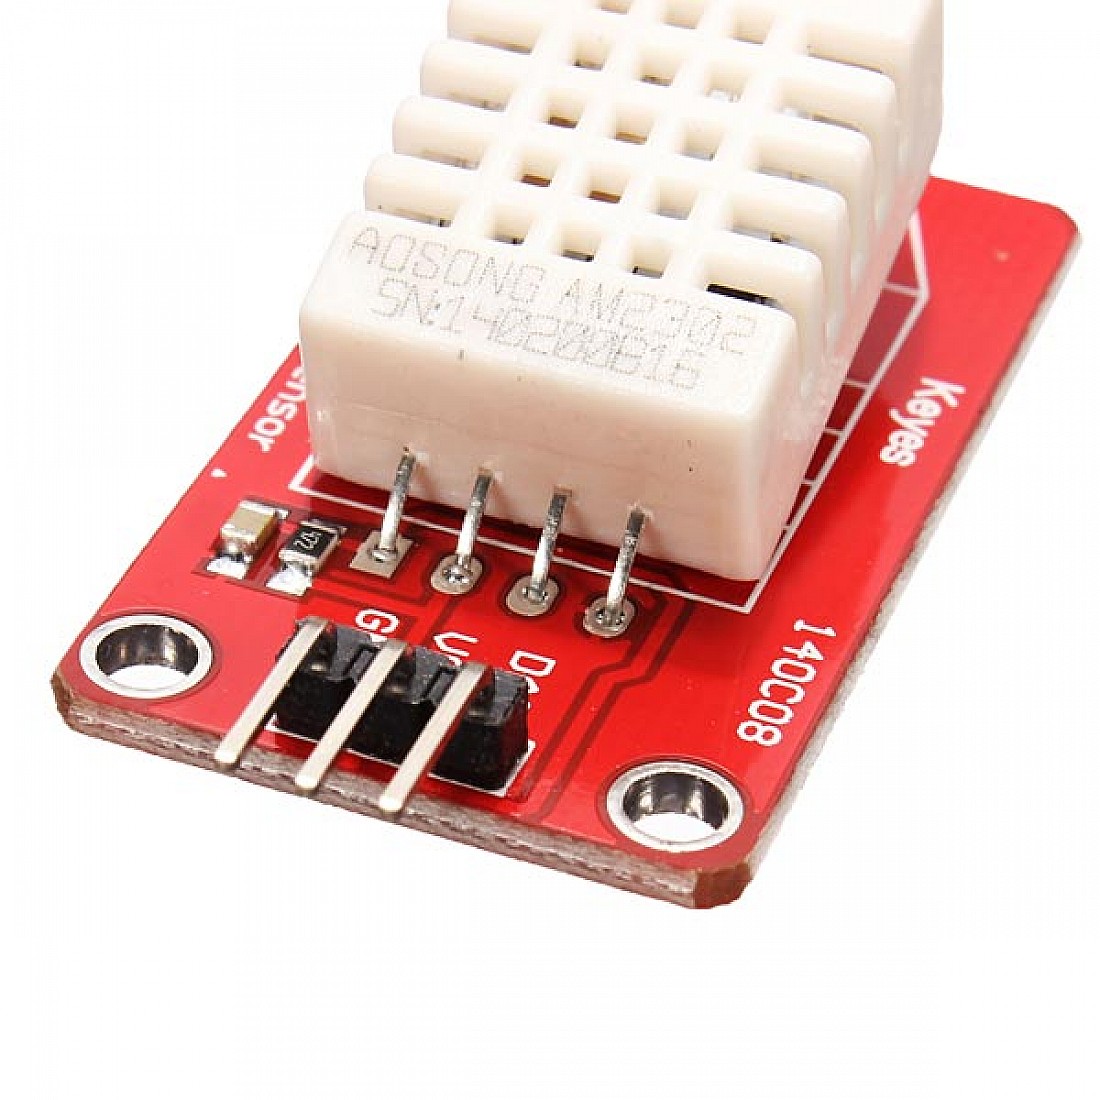 Am2302 Dht22 Temperature And Humidity Sensor Module For Arduino Scm 0778